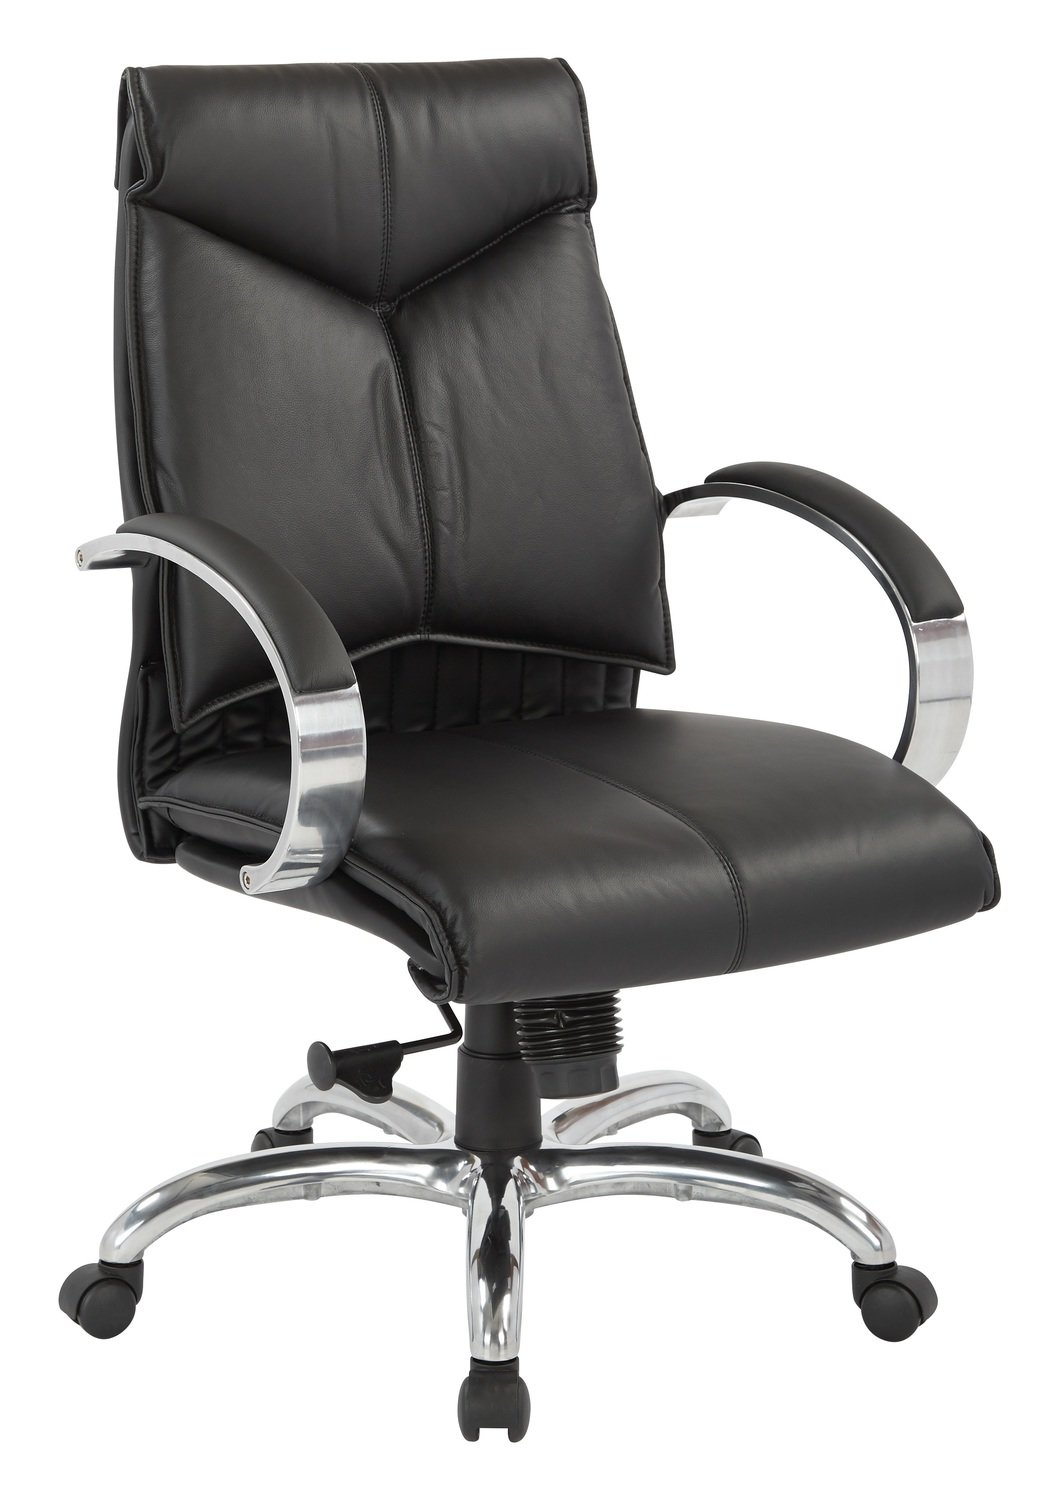 DELUXE MID BACK BLACK CHAIR